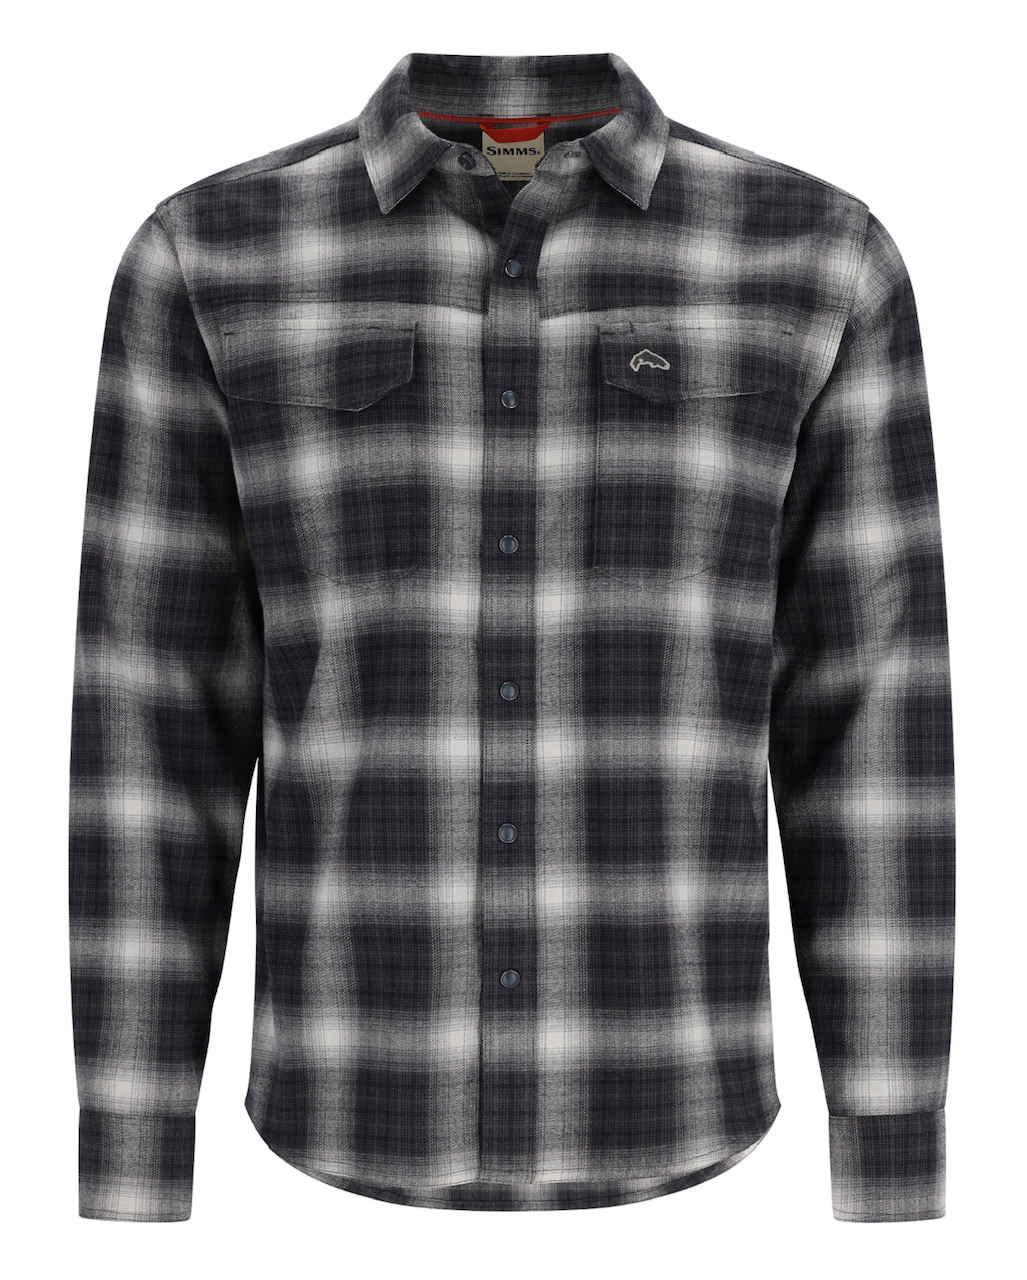 Simms M's Gallatin Flannel LS Shirt - Slate Ombre Plaid - Large